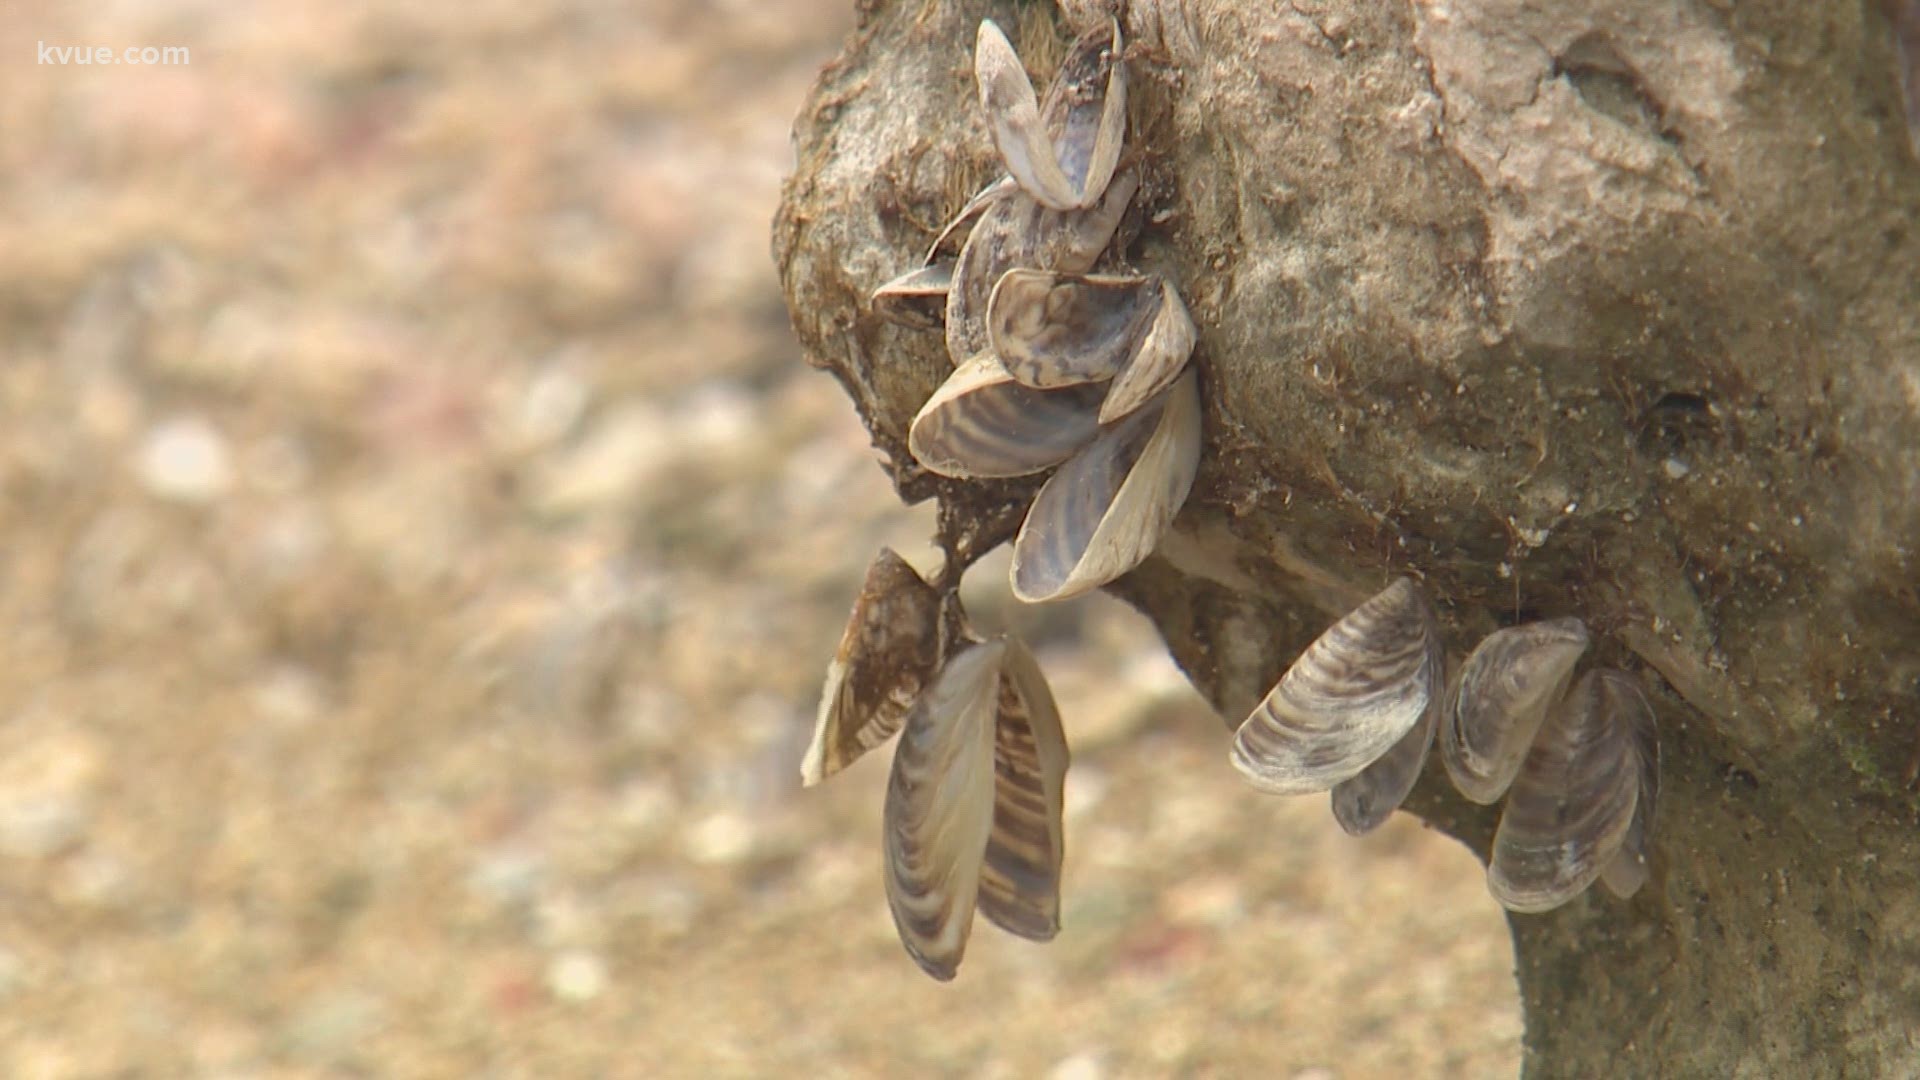 Just over three years after first appearing in Lake Travis, zebra mussels are everywhere. Pattrik Perez shows what happens when visitors come unprepared.